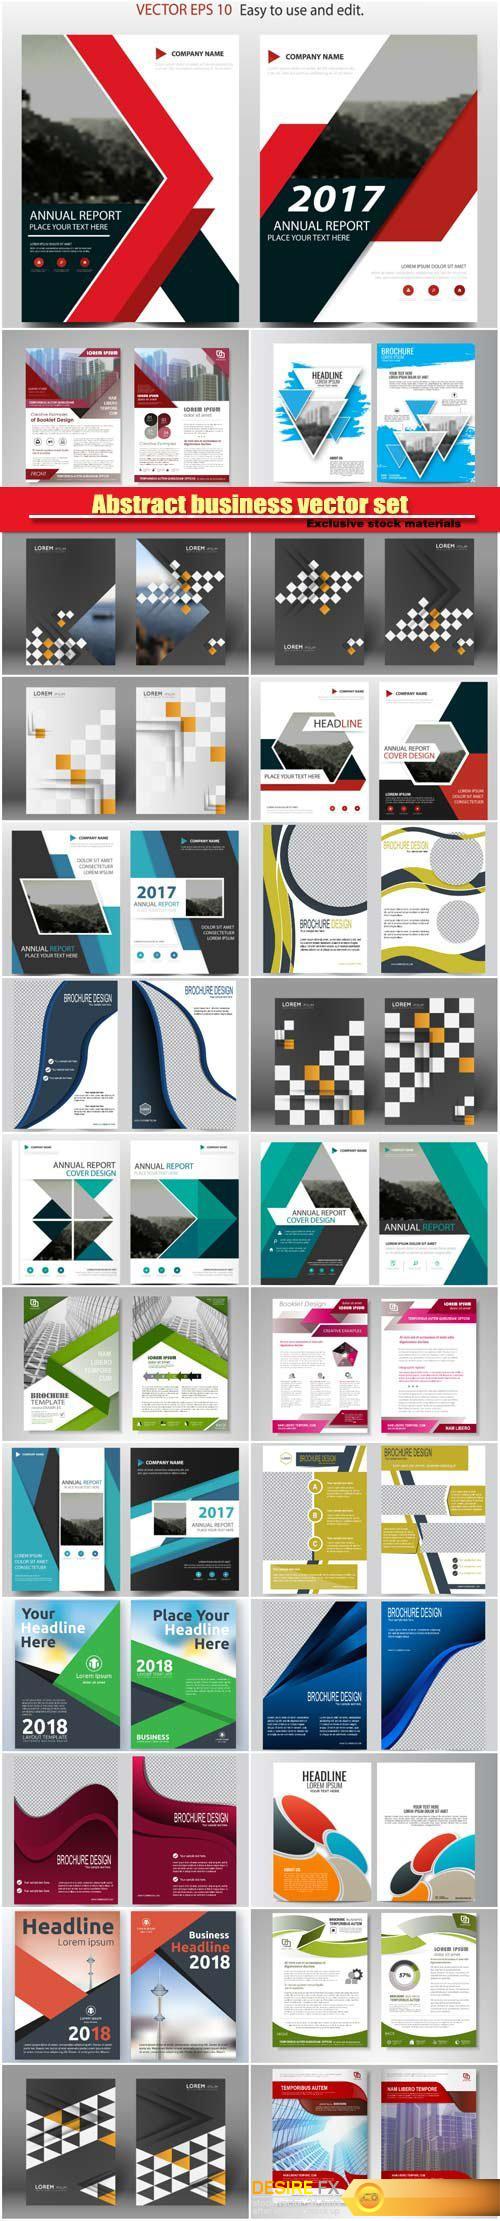 Vector brochures and flyers template design